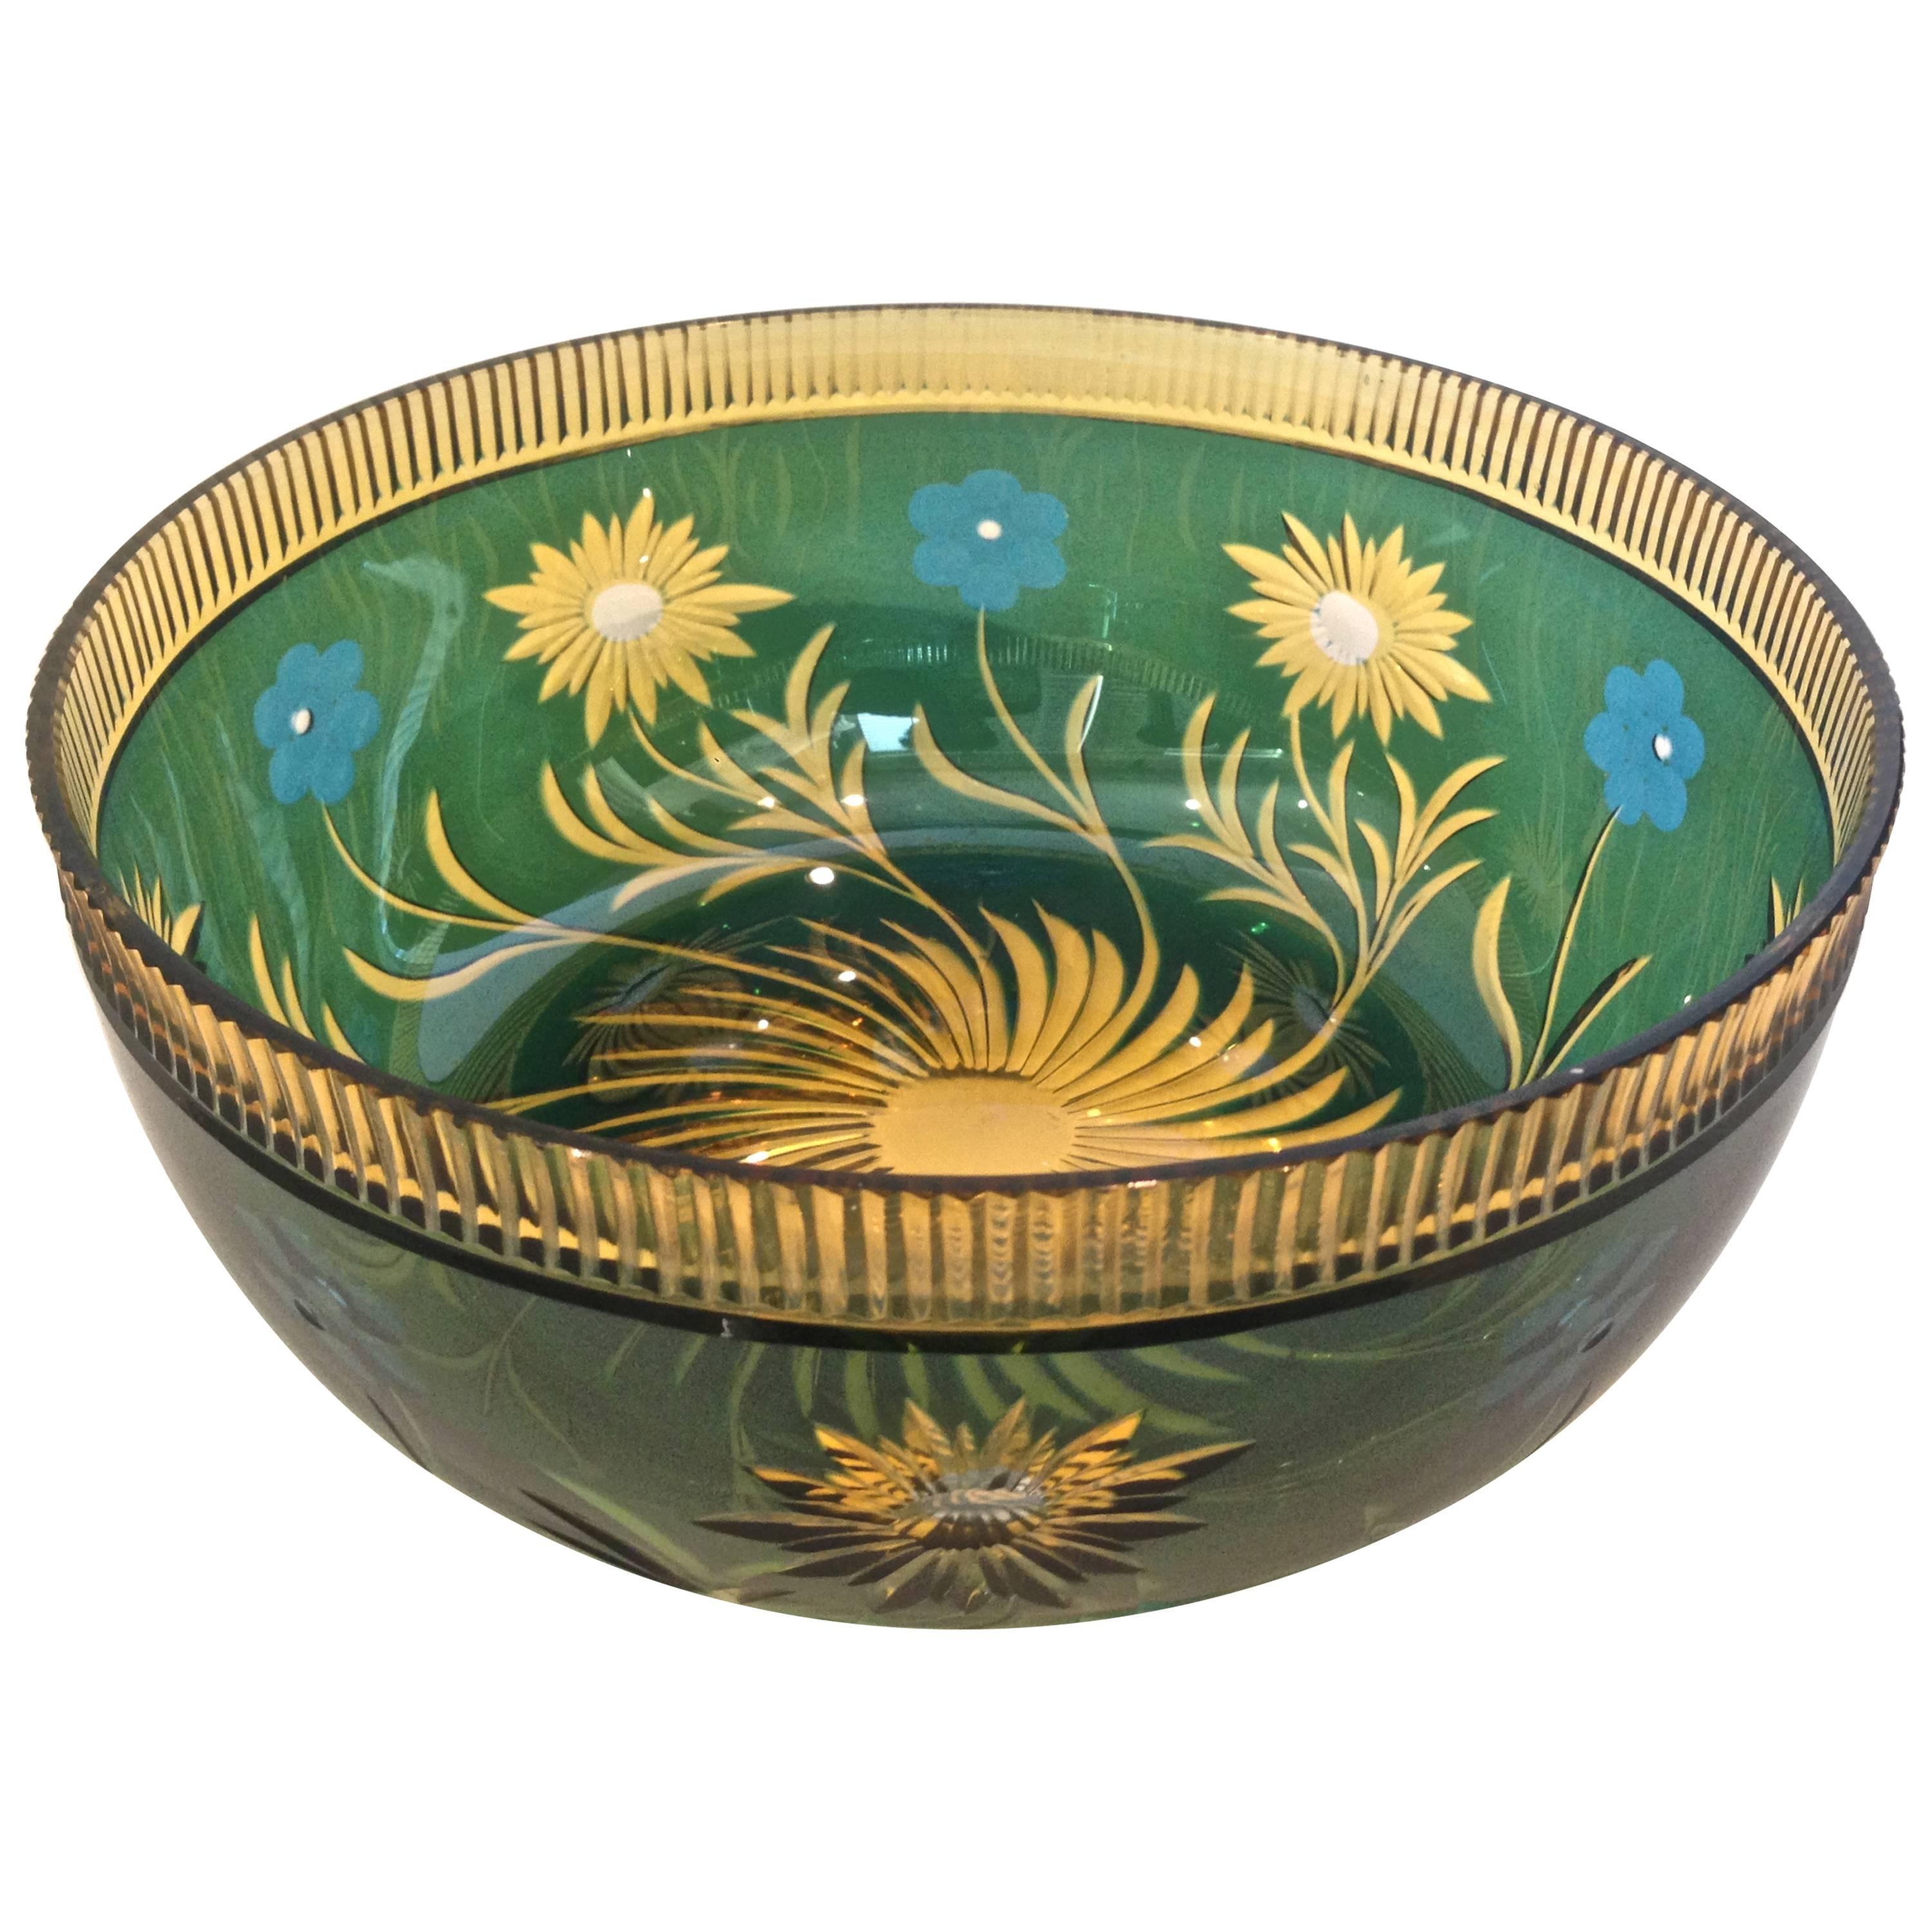 Outstanding Val St Lambert Four Color Bowl, circa 1940